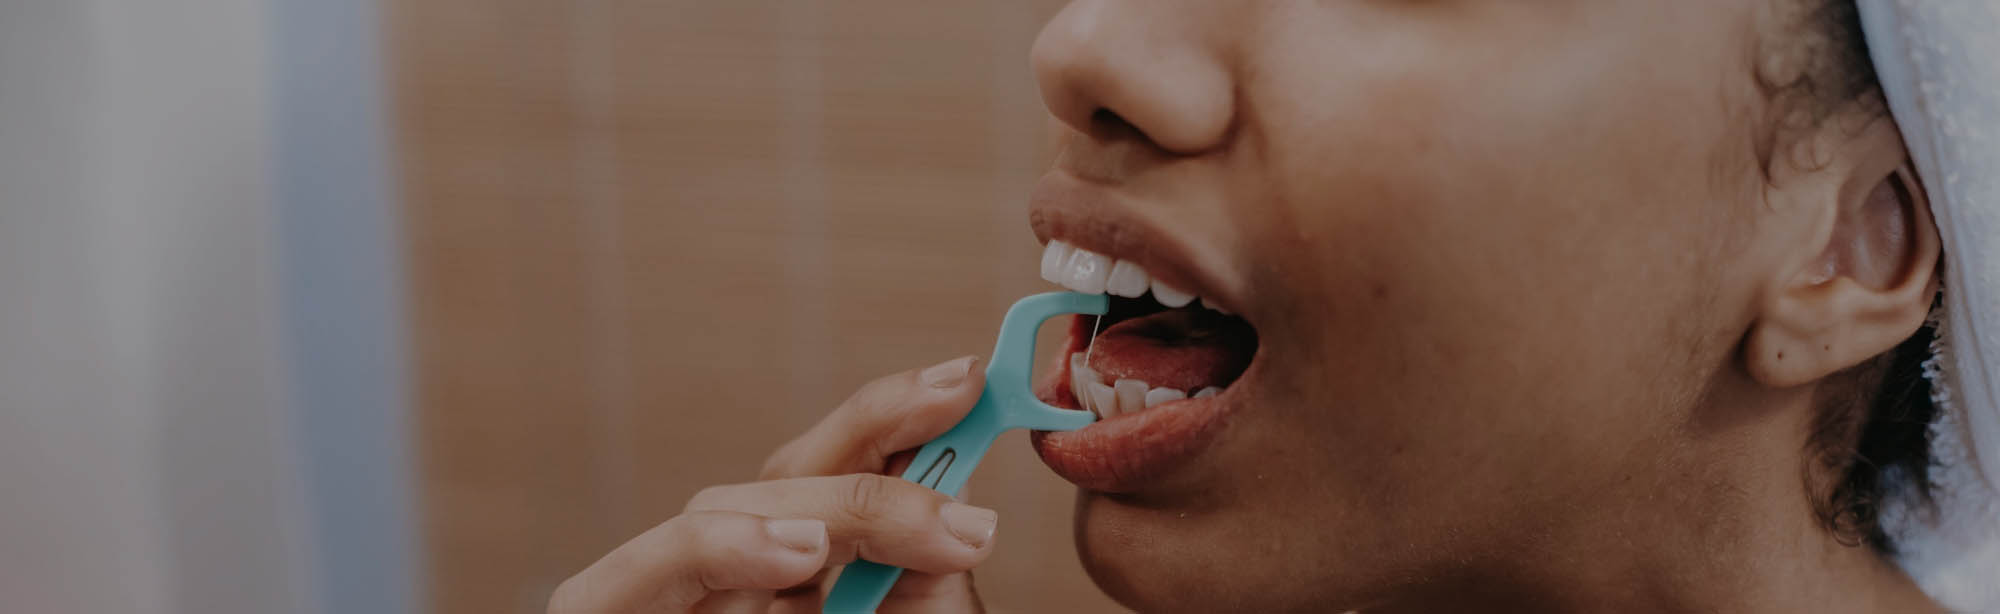 How To Floss Your Teeth